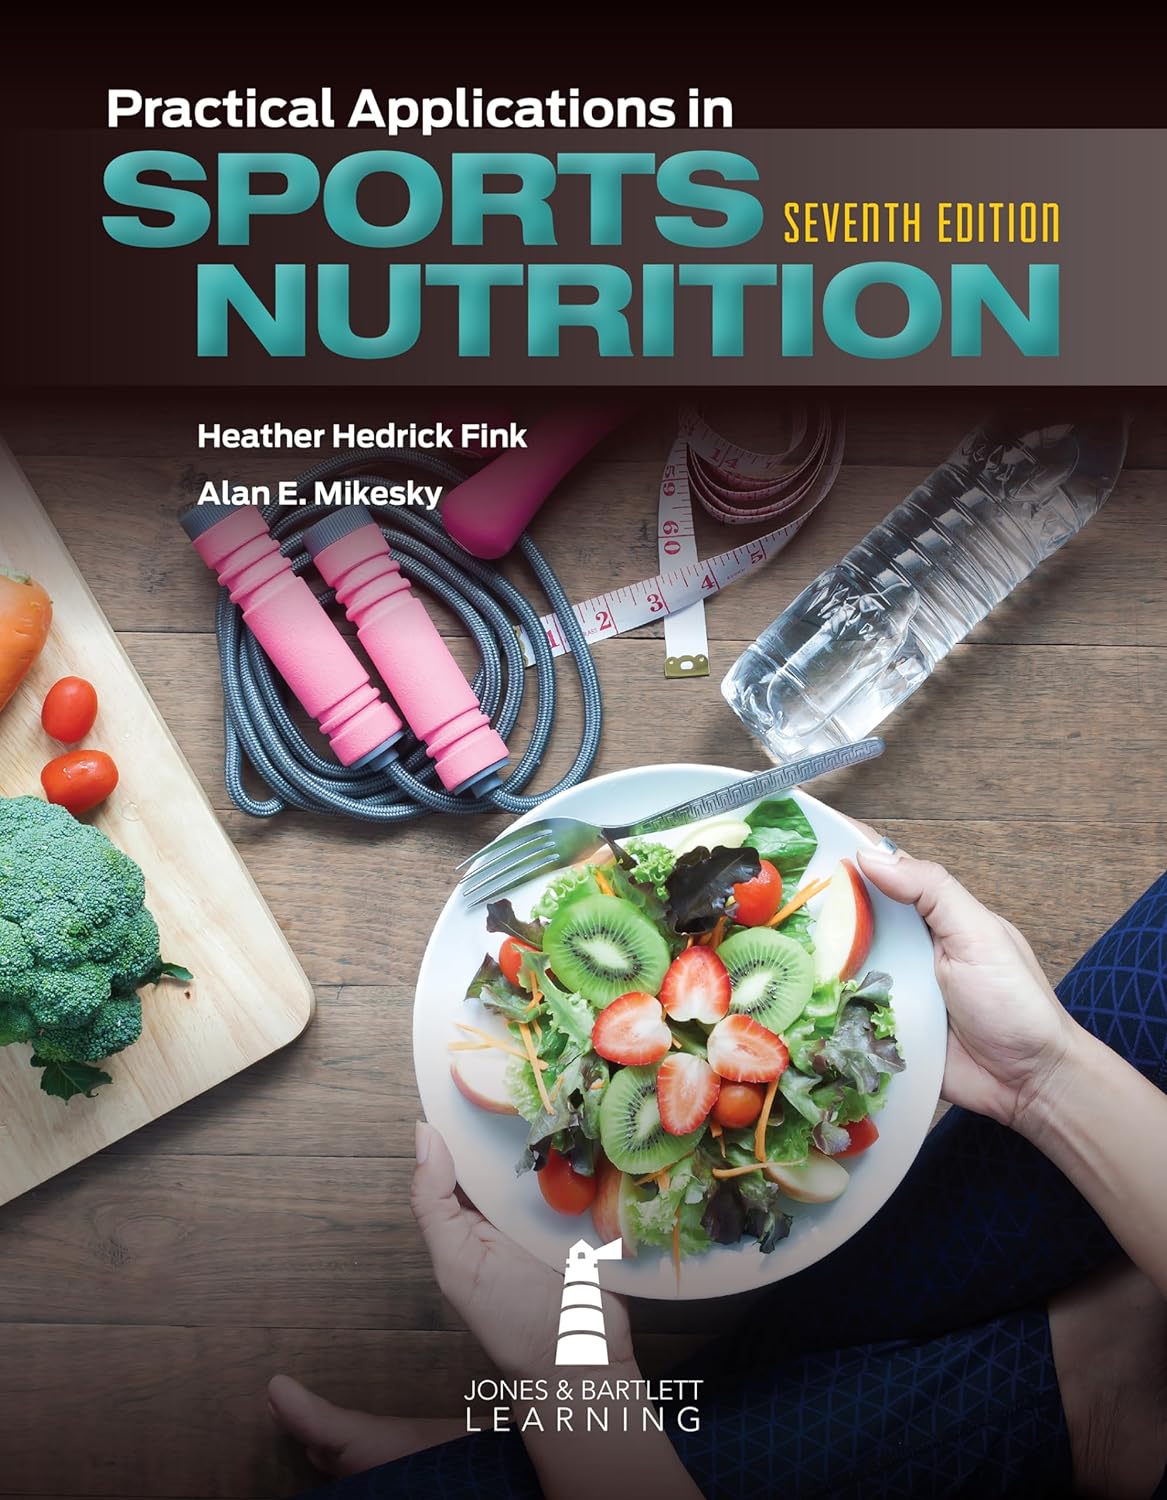 Practical Applications in Sports Nutrition 7th Edition